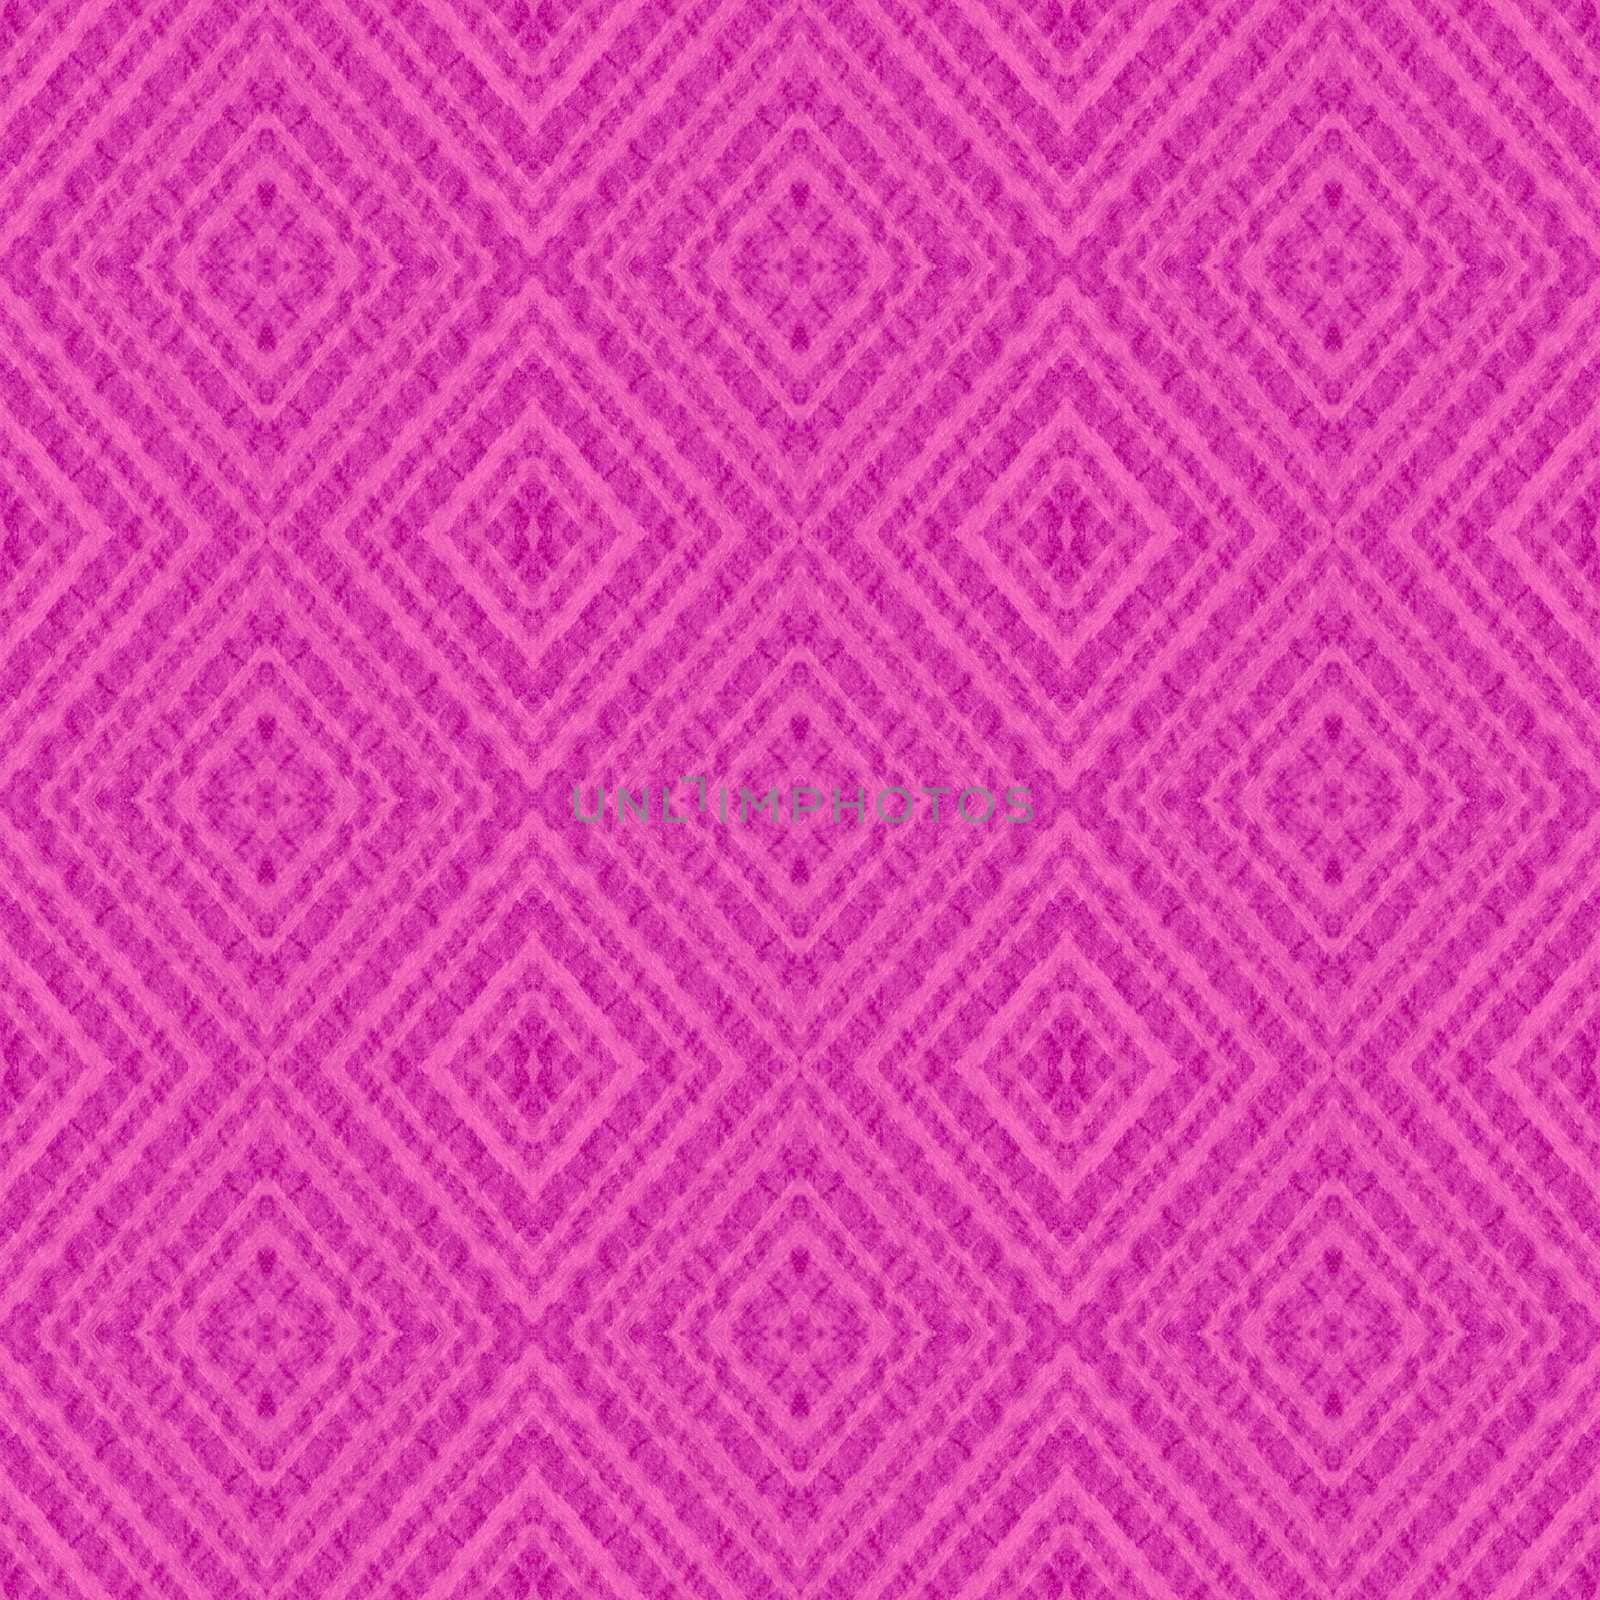 Seamless Tillable Woven Background Pattern by Nonboe